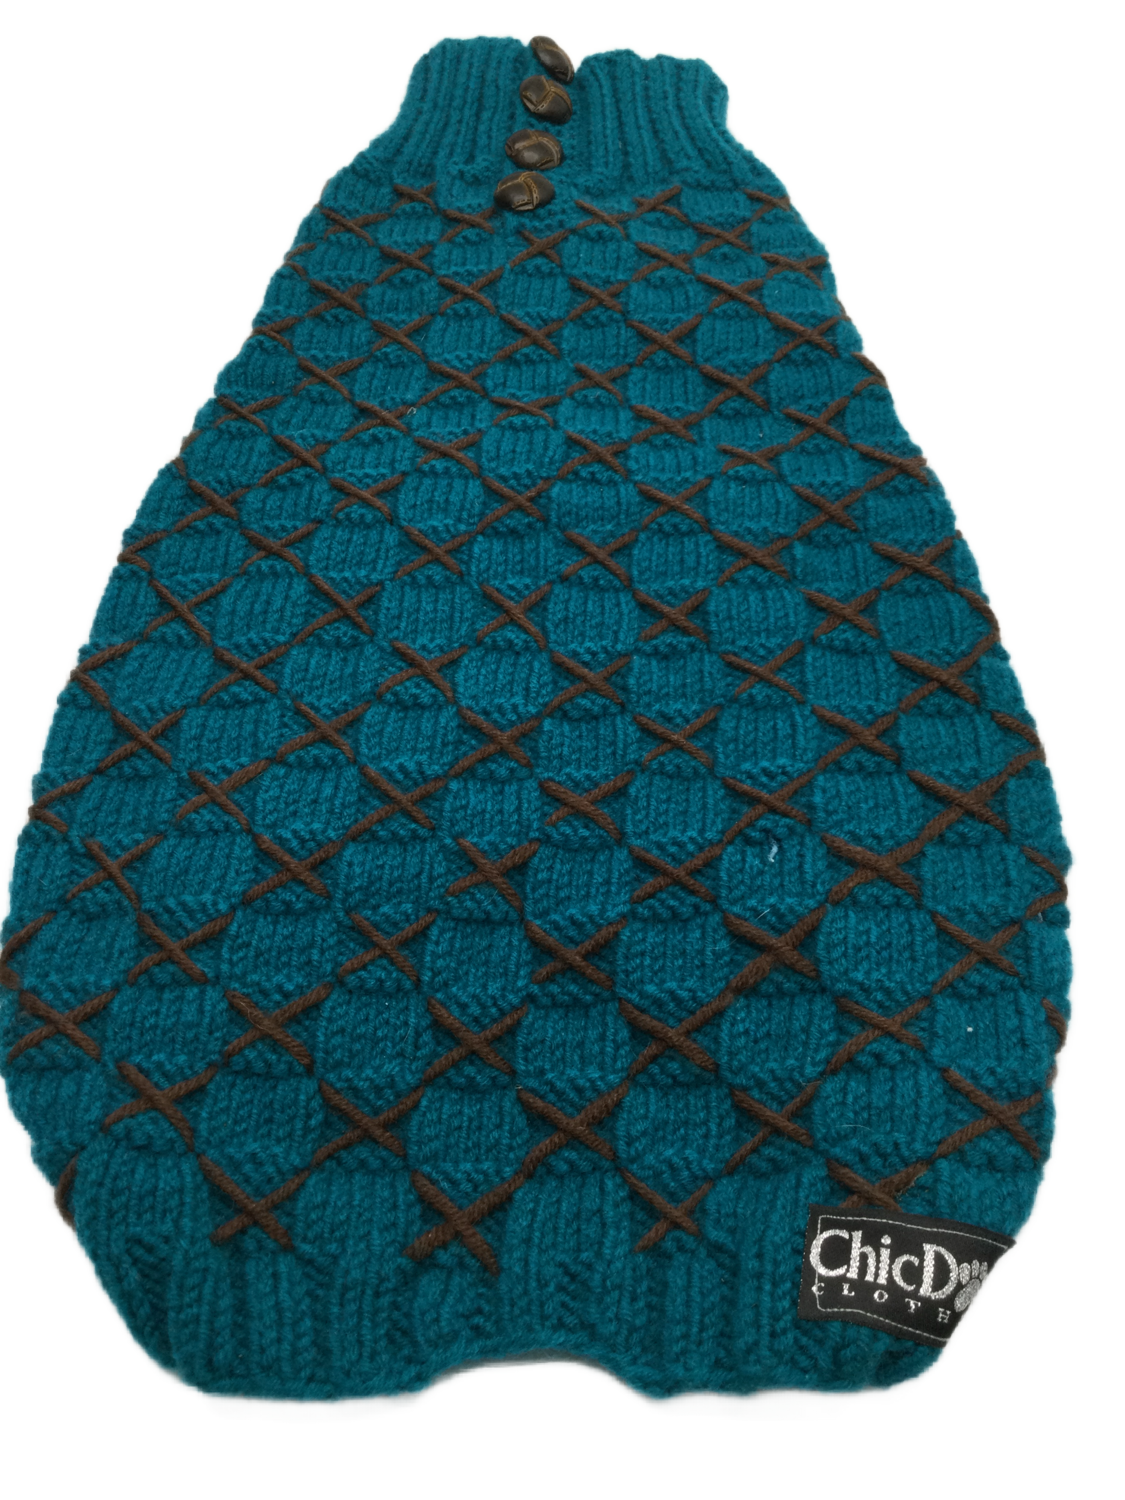 Chic Dog Clothing Teal Sweater